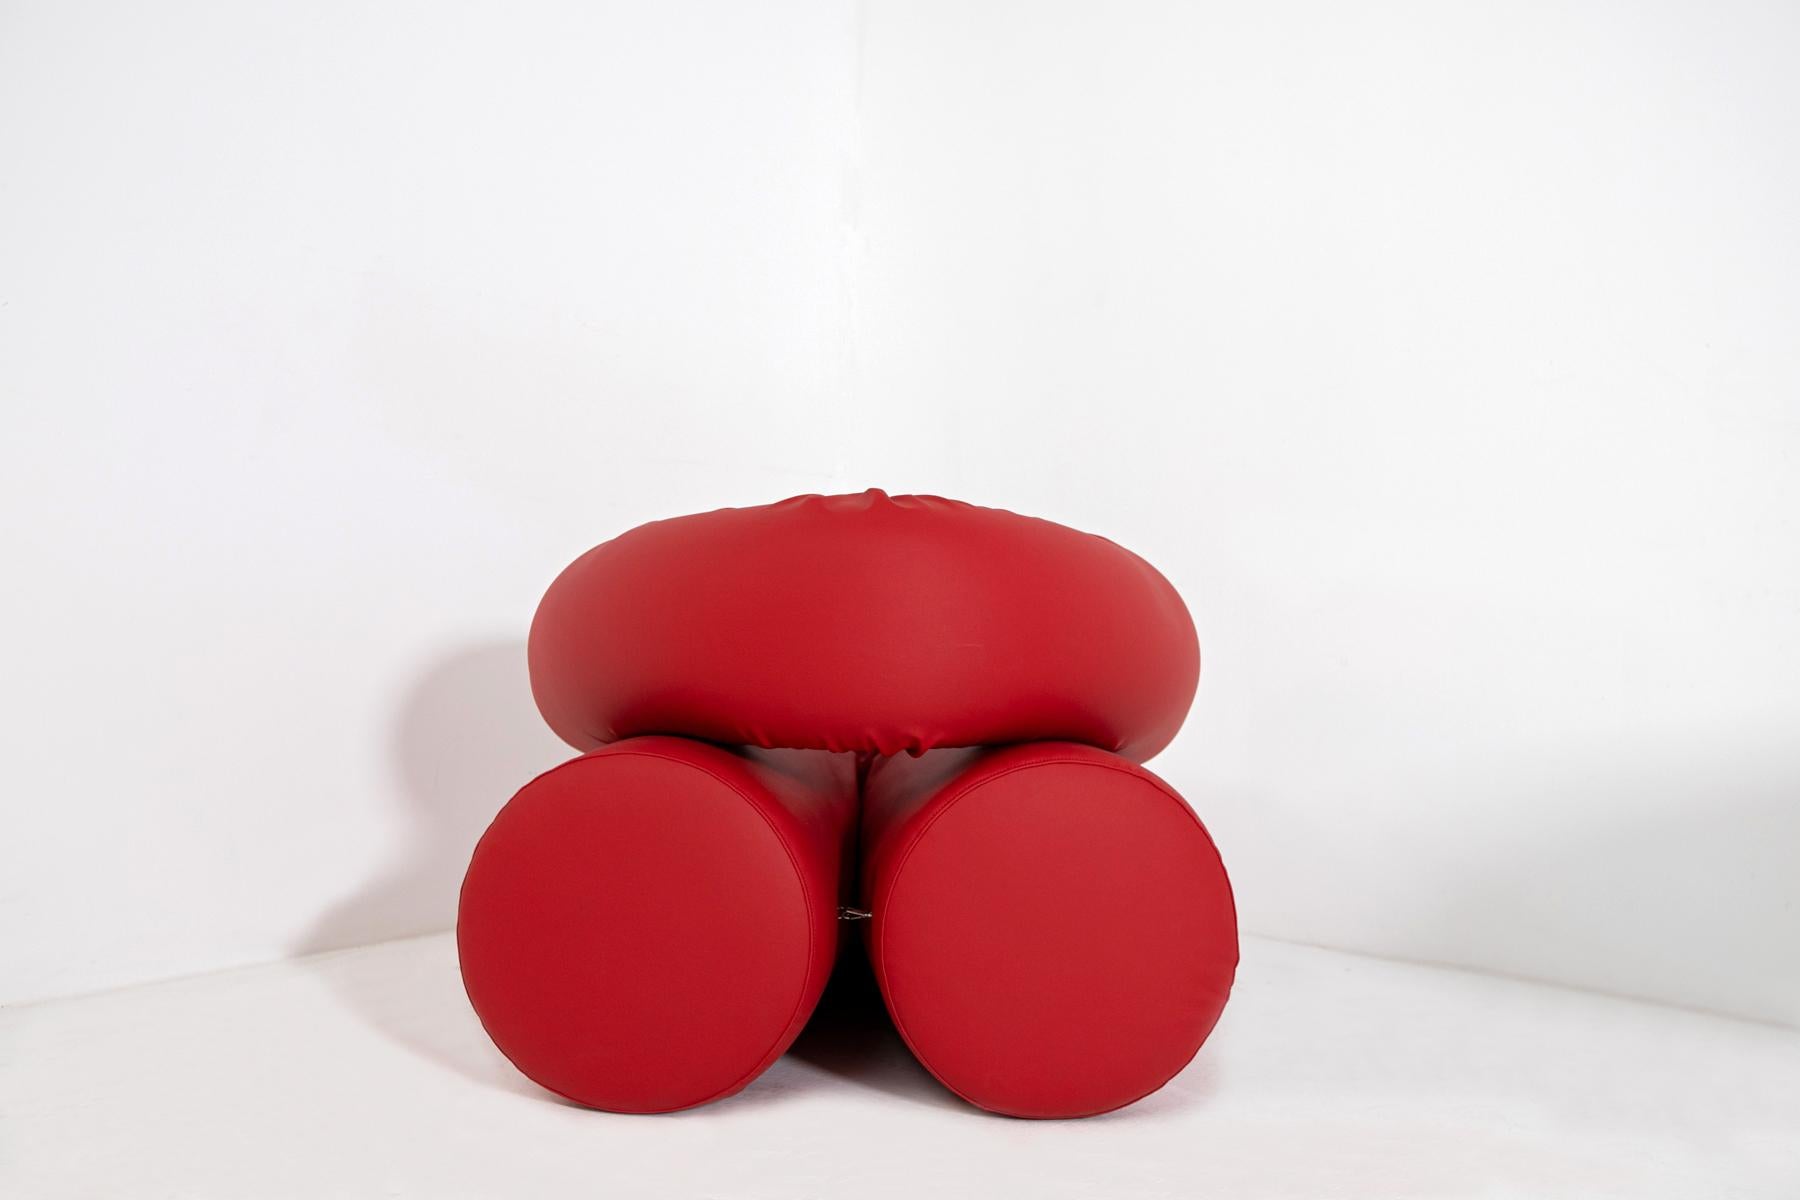 Contemporary Italian Armchair by Giovanni Grismondi Design, Red Leather, 2020 For Sale 5